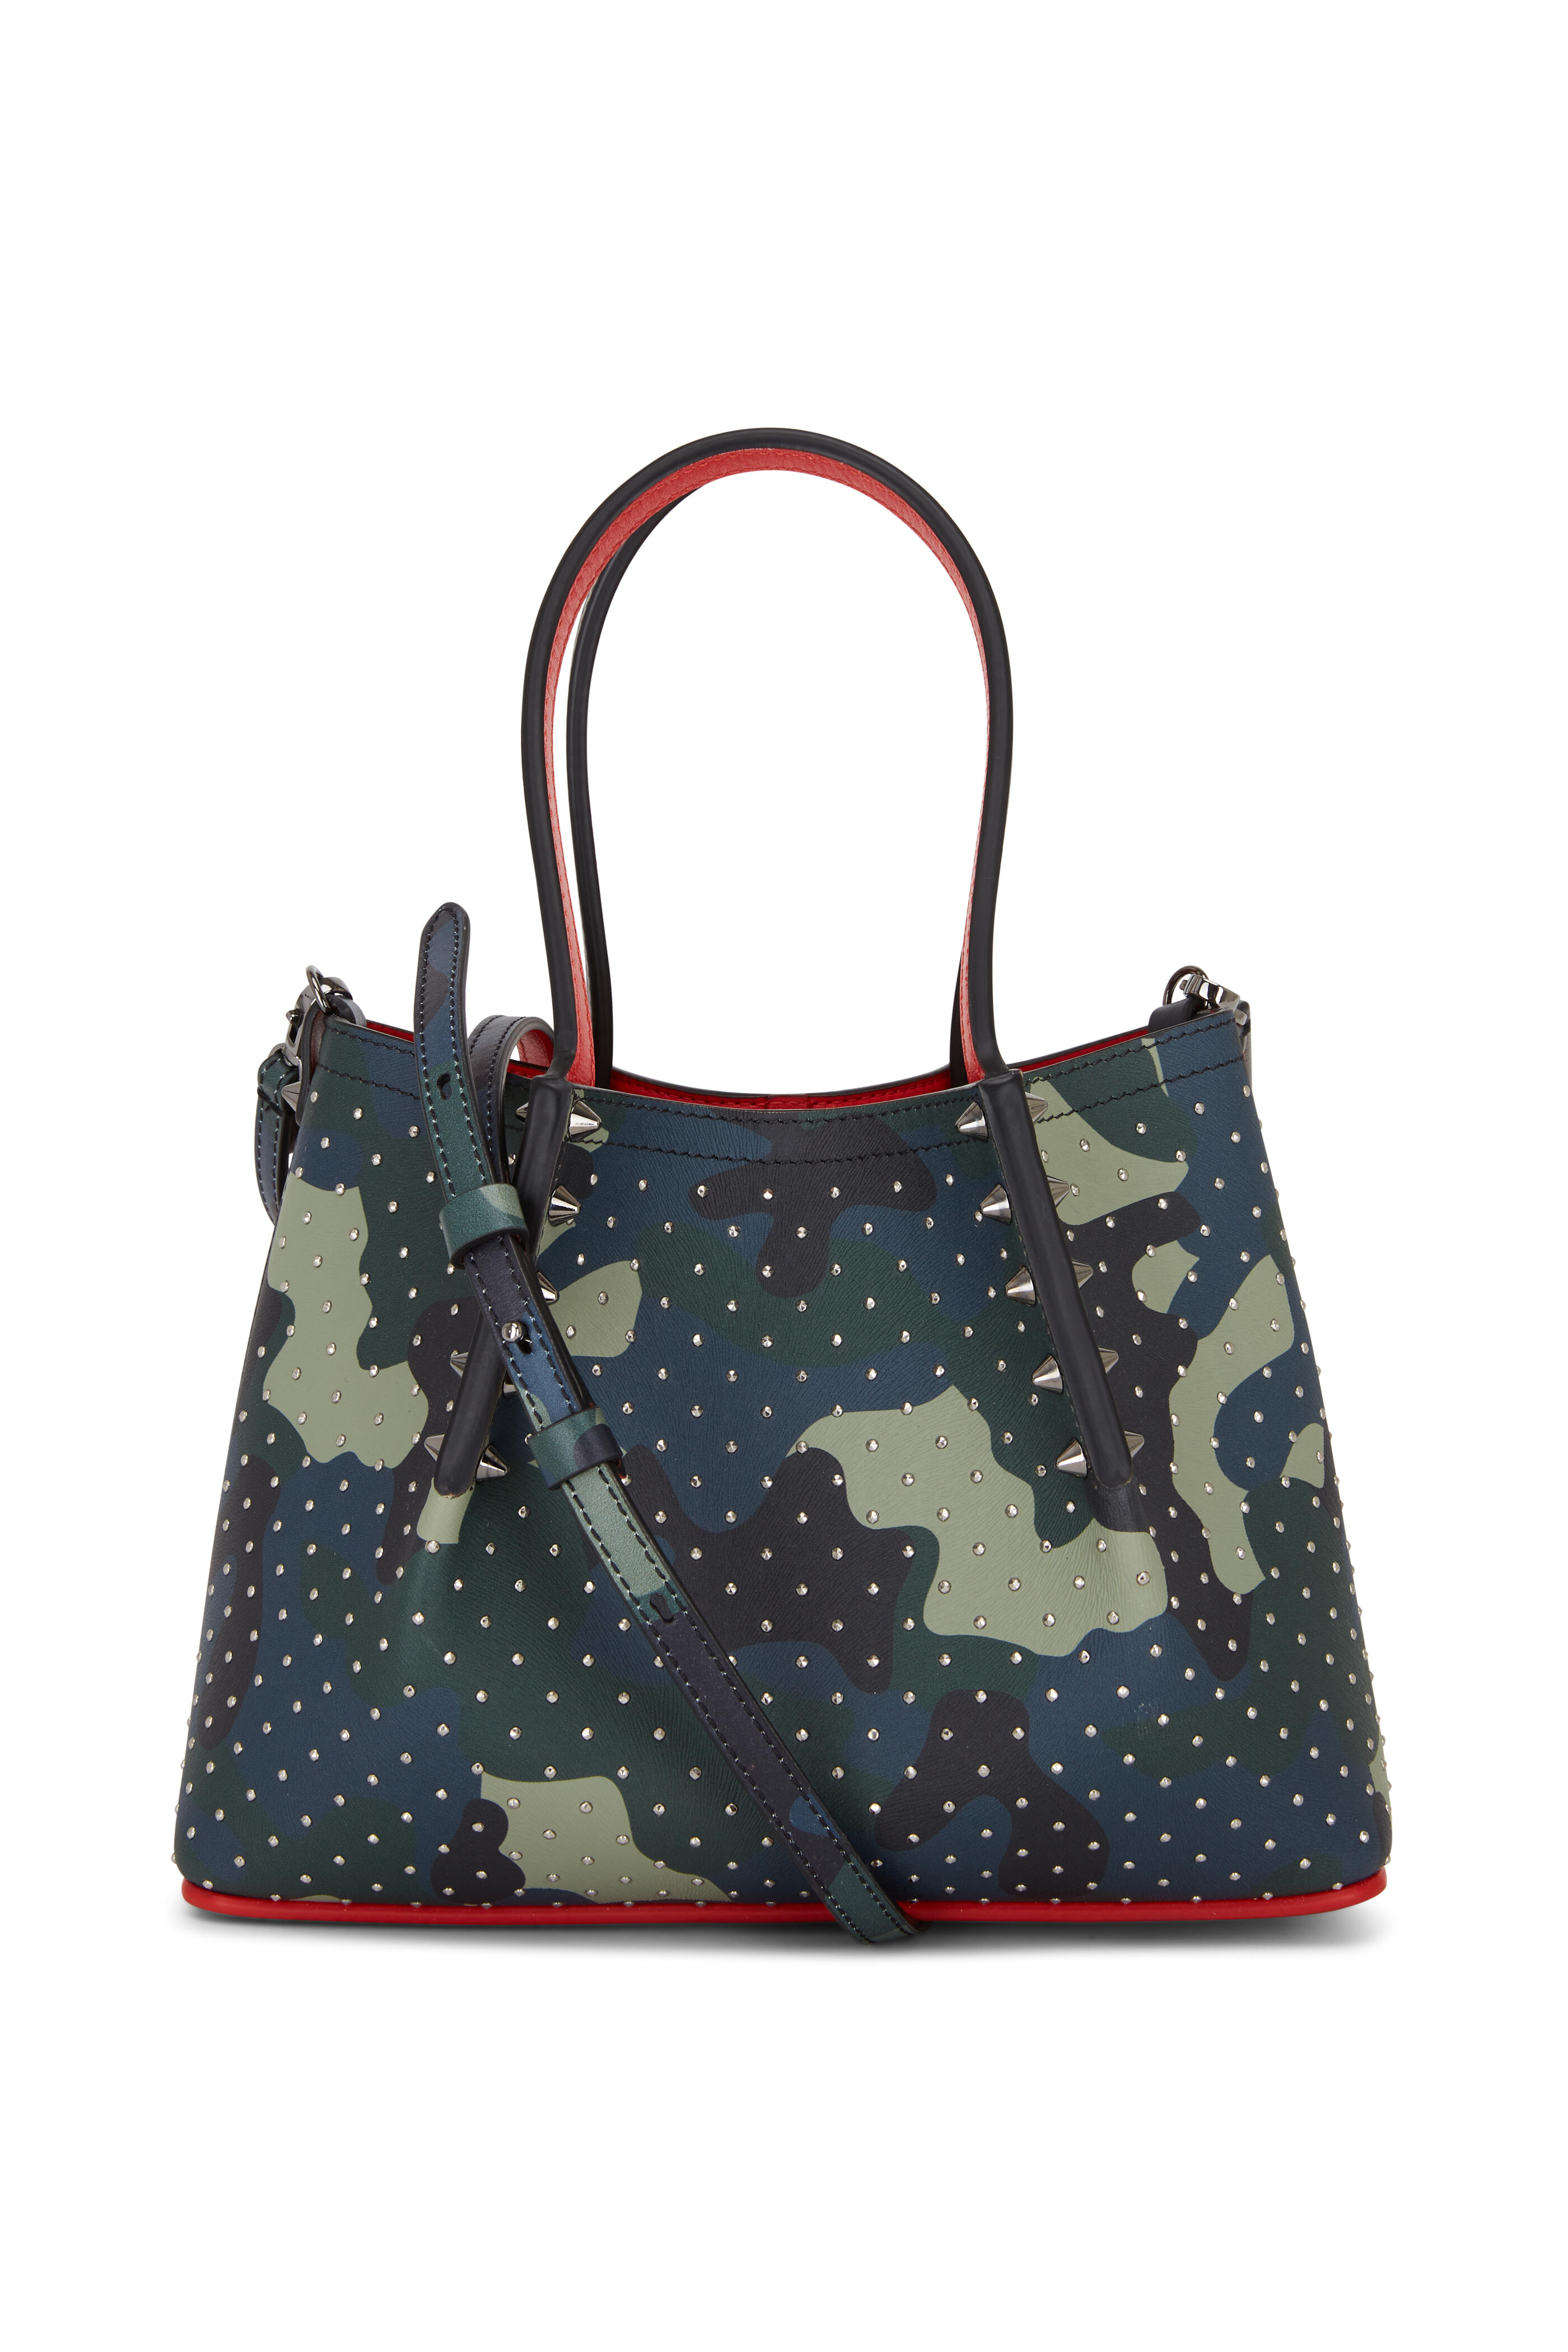 How To Pair The Christian Louboutin for Louis Vuitton Bag